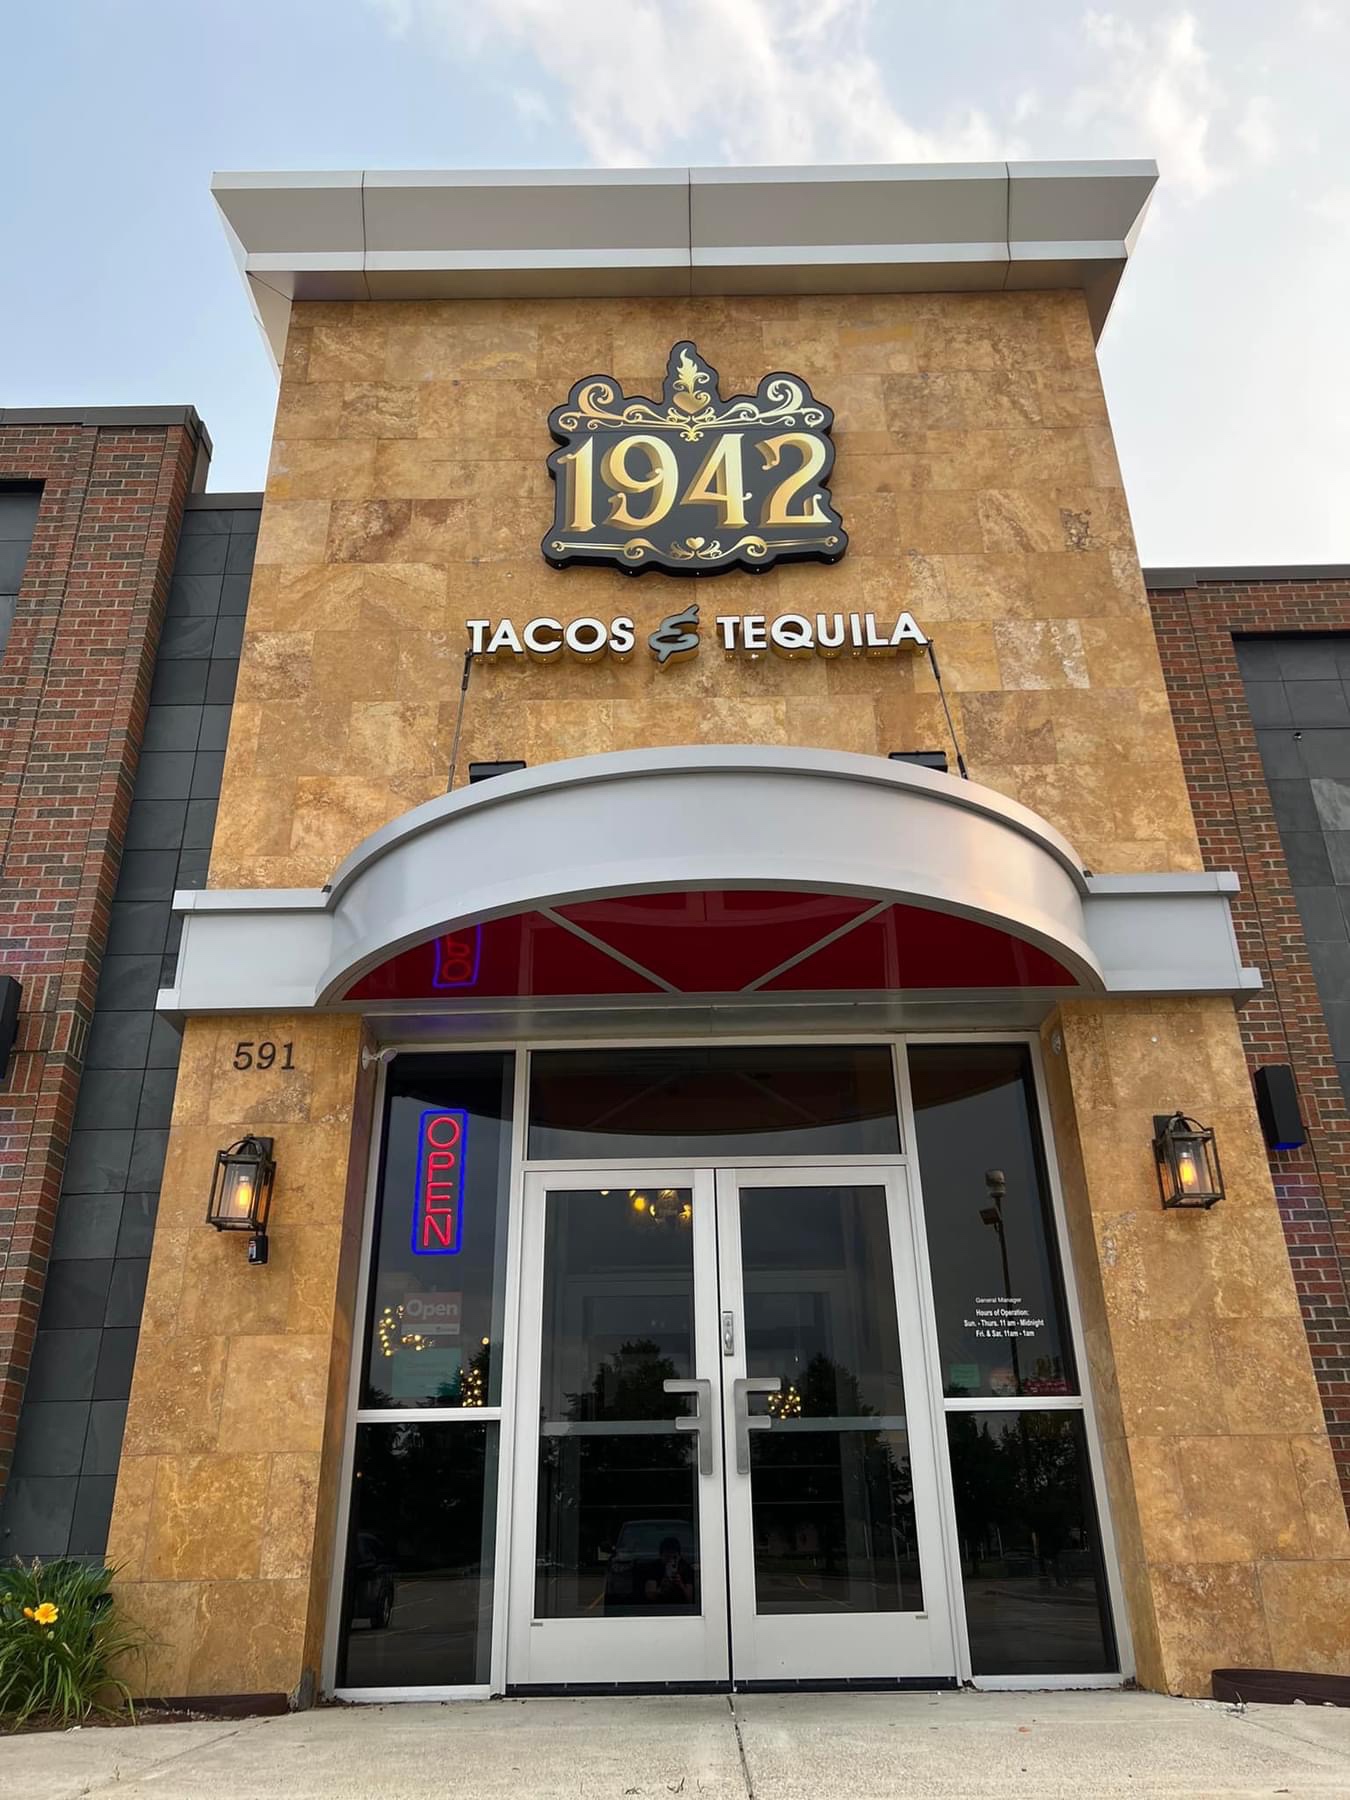 1942 Tacos & Tequila